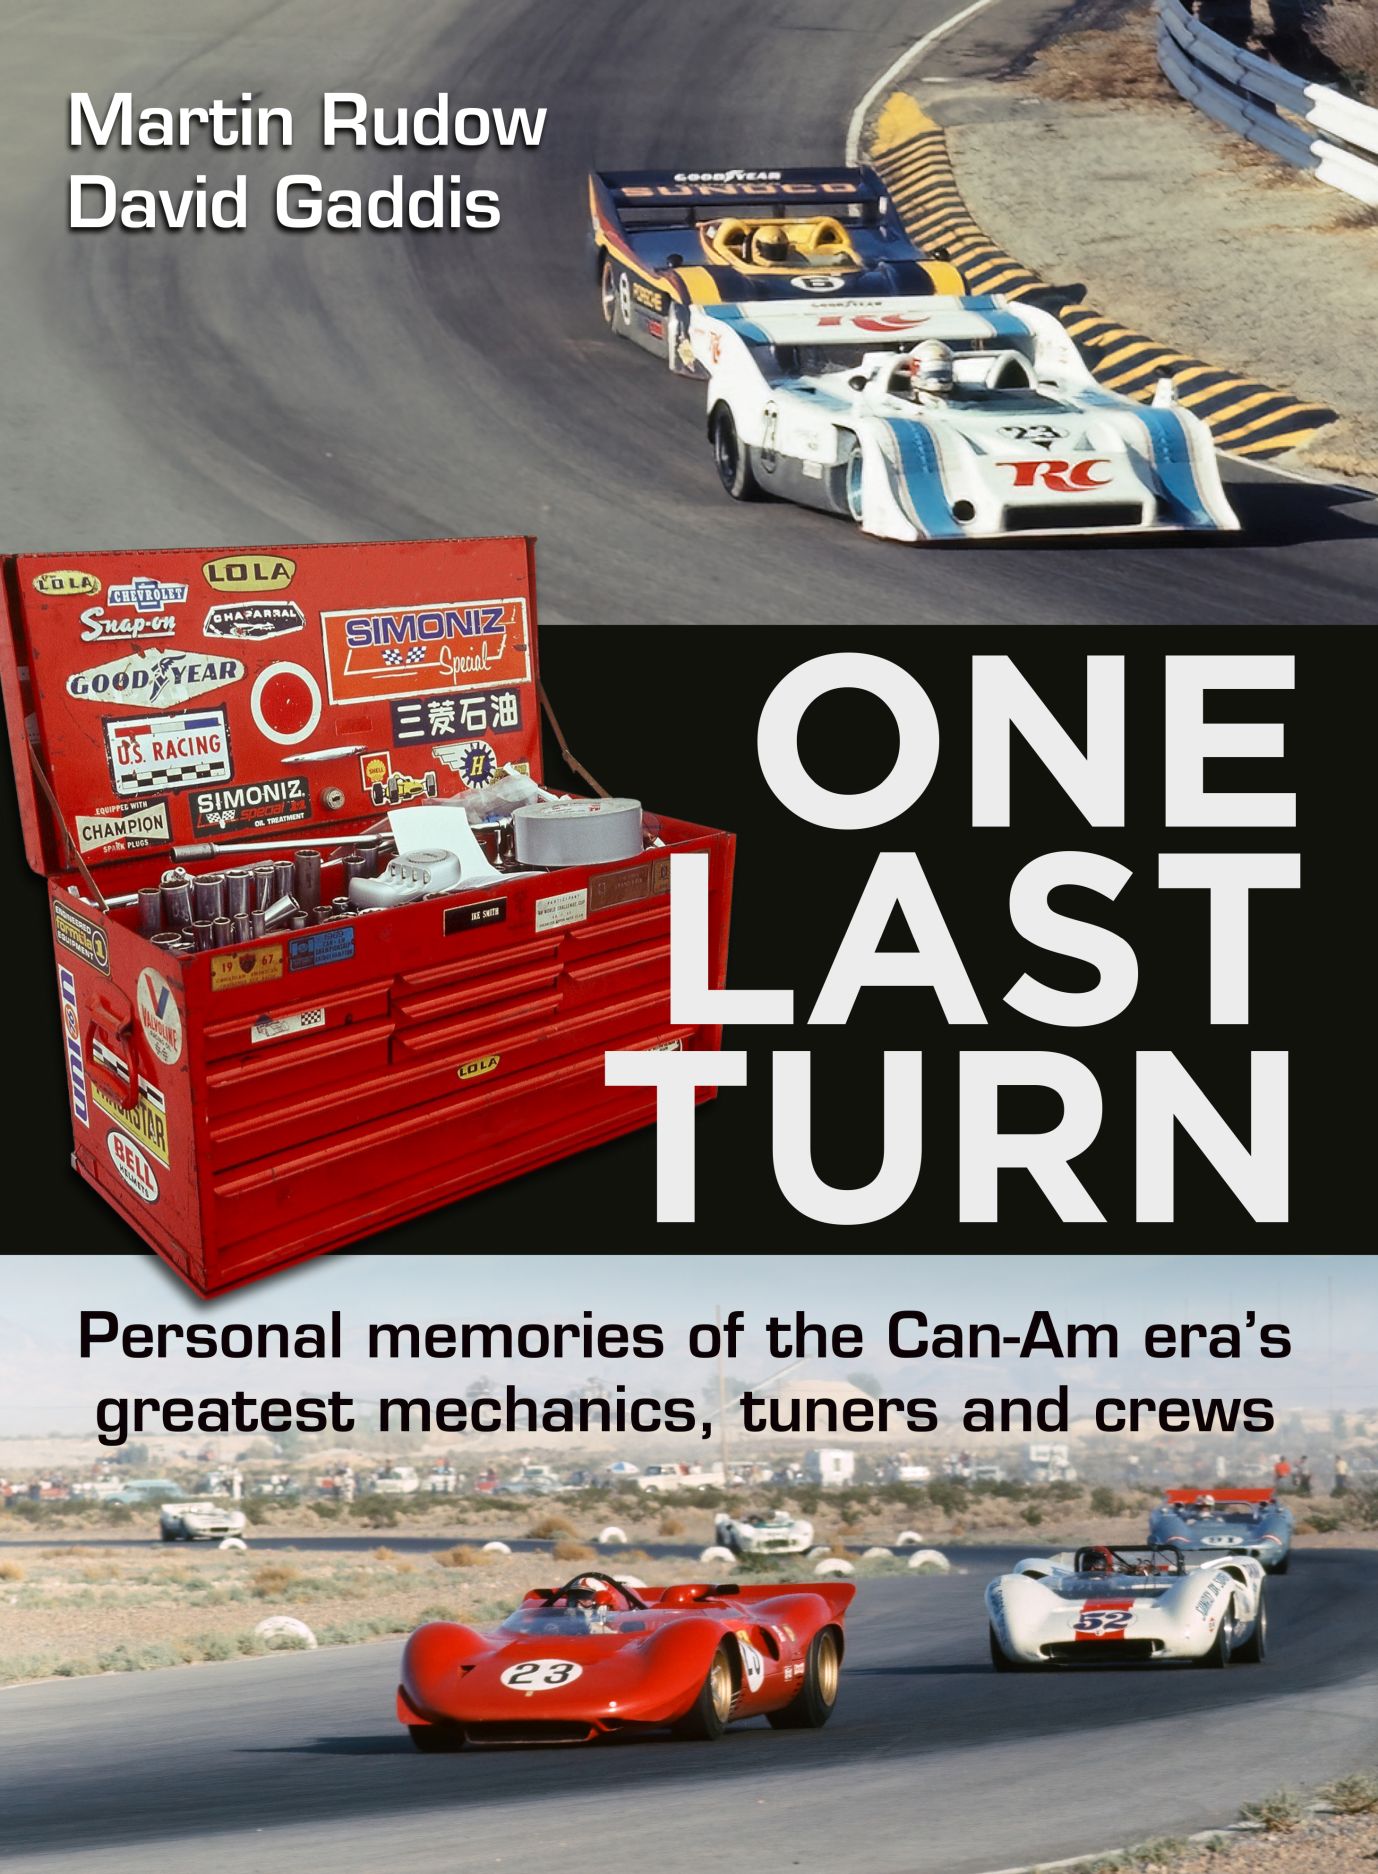 One Last Turn: Personal memories and tuners greatest Rudow, the of Can-Am Gaddis crews, mechanics, era\'s